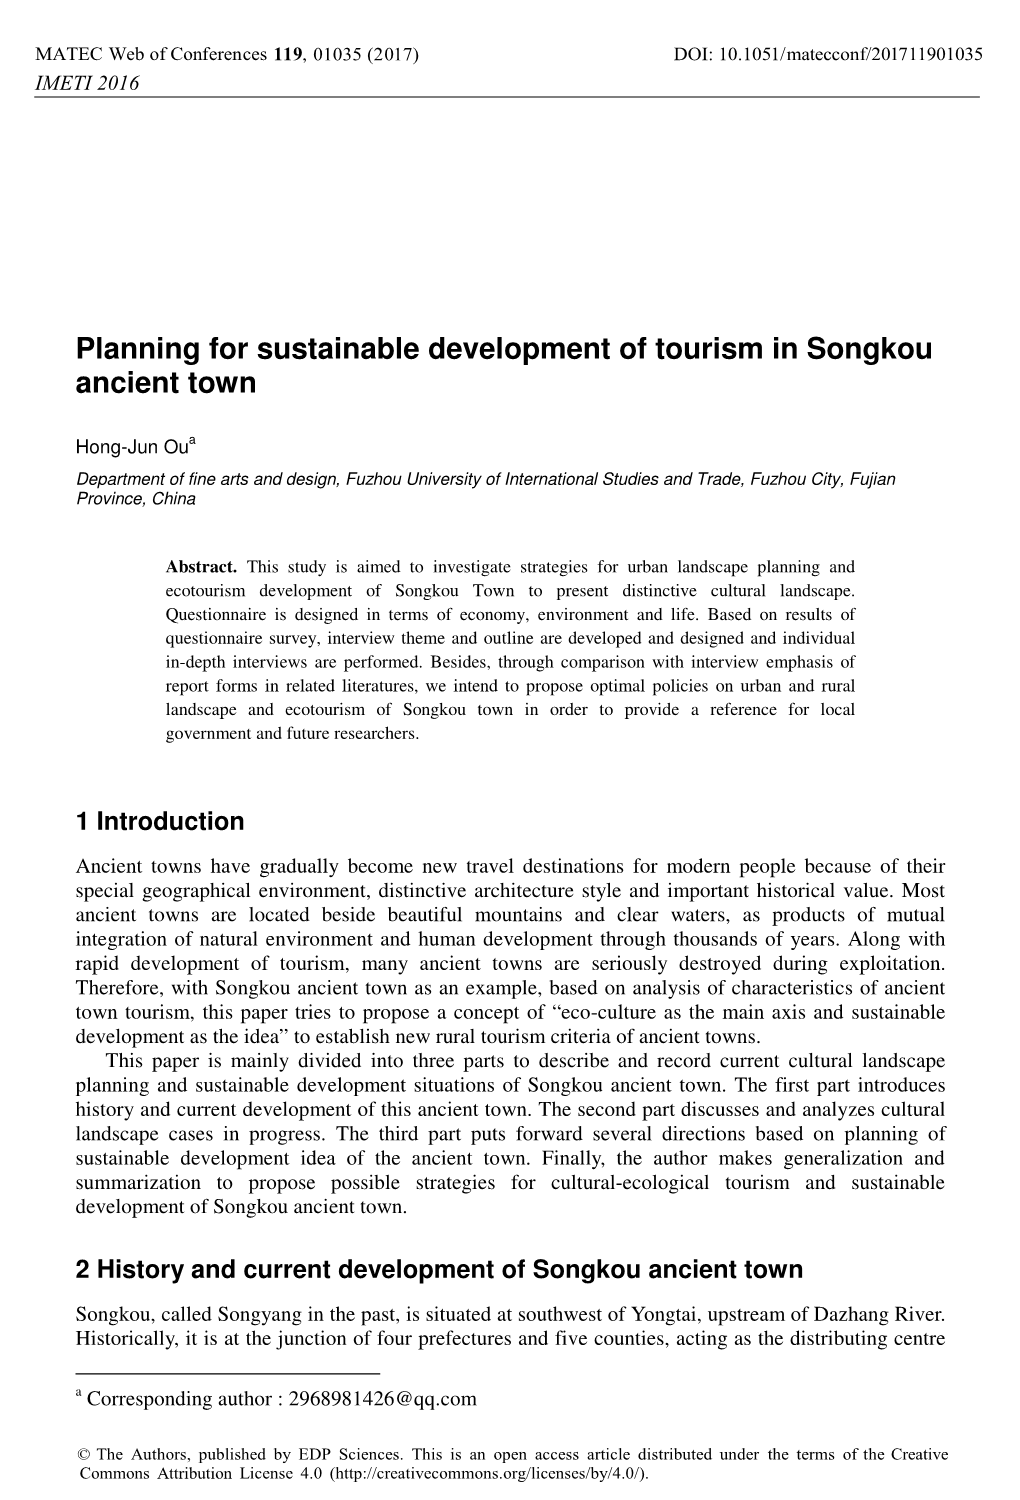 Planning for Sustainable Development of Tourism in Songkou Ancient Town